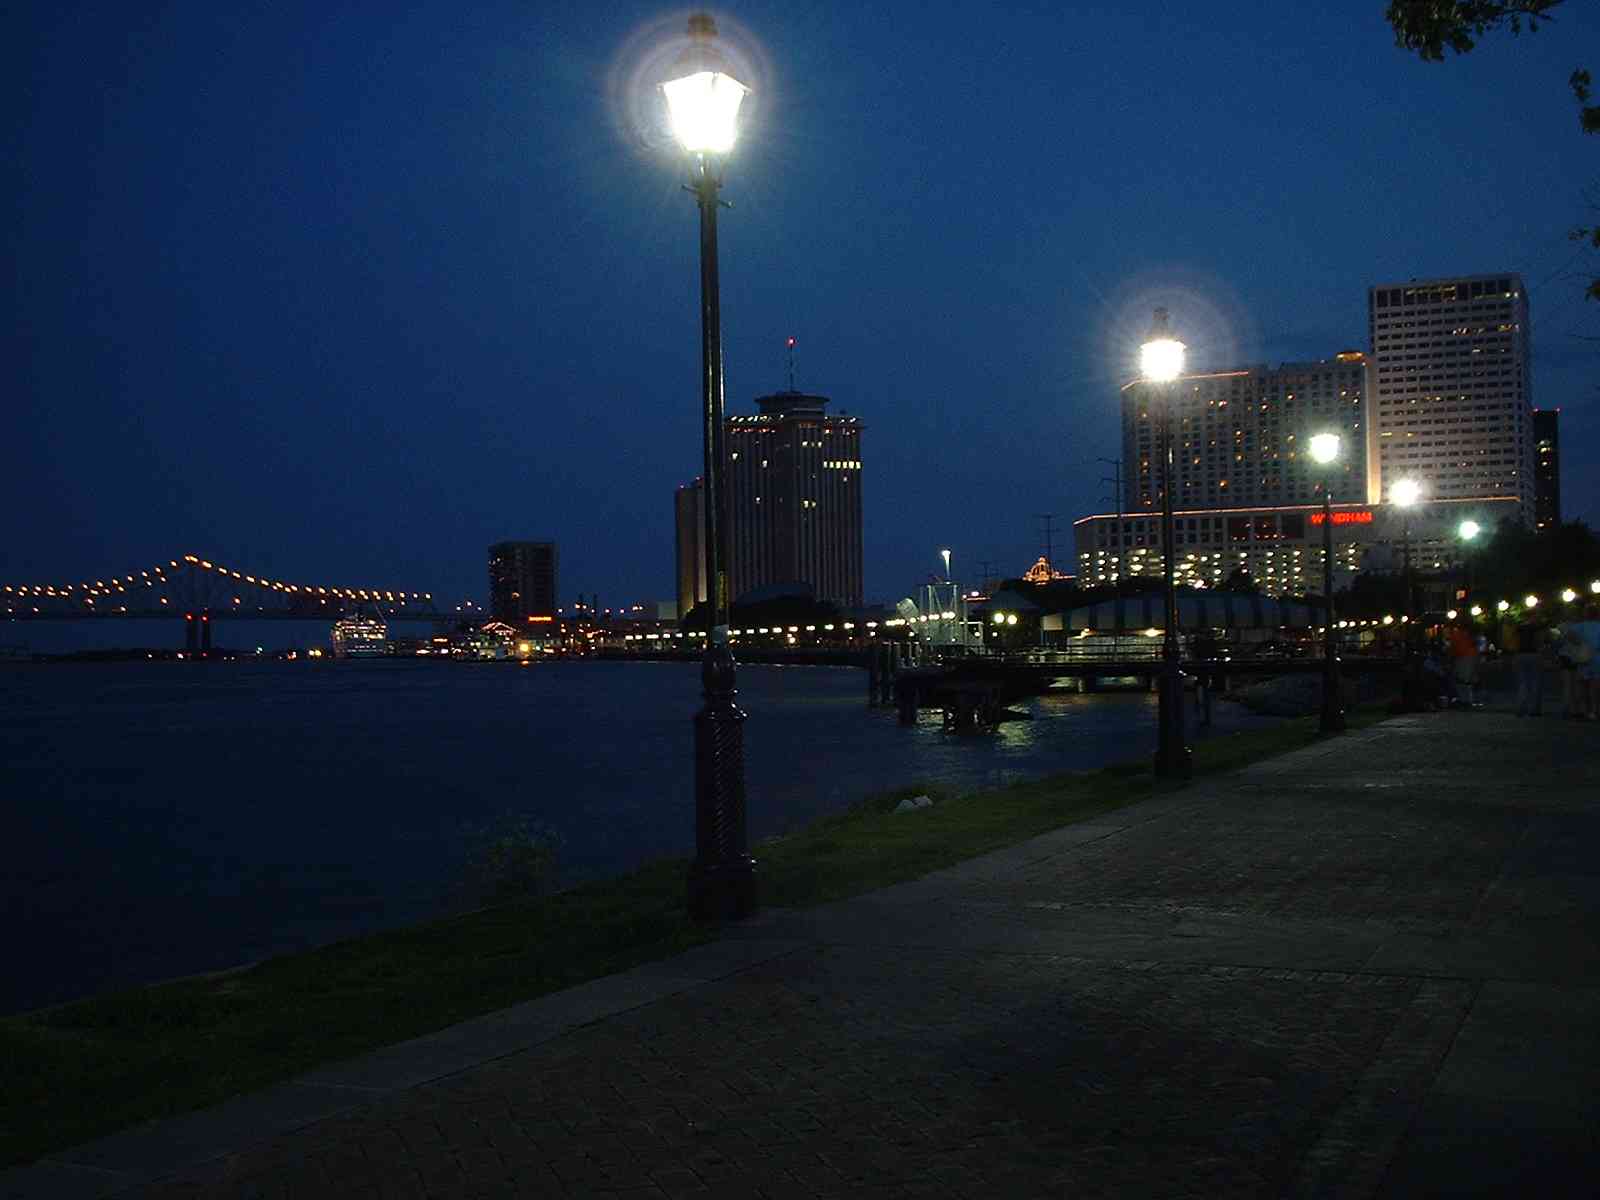 Mississippi river, New Orleans, Louisiana 2002